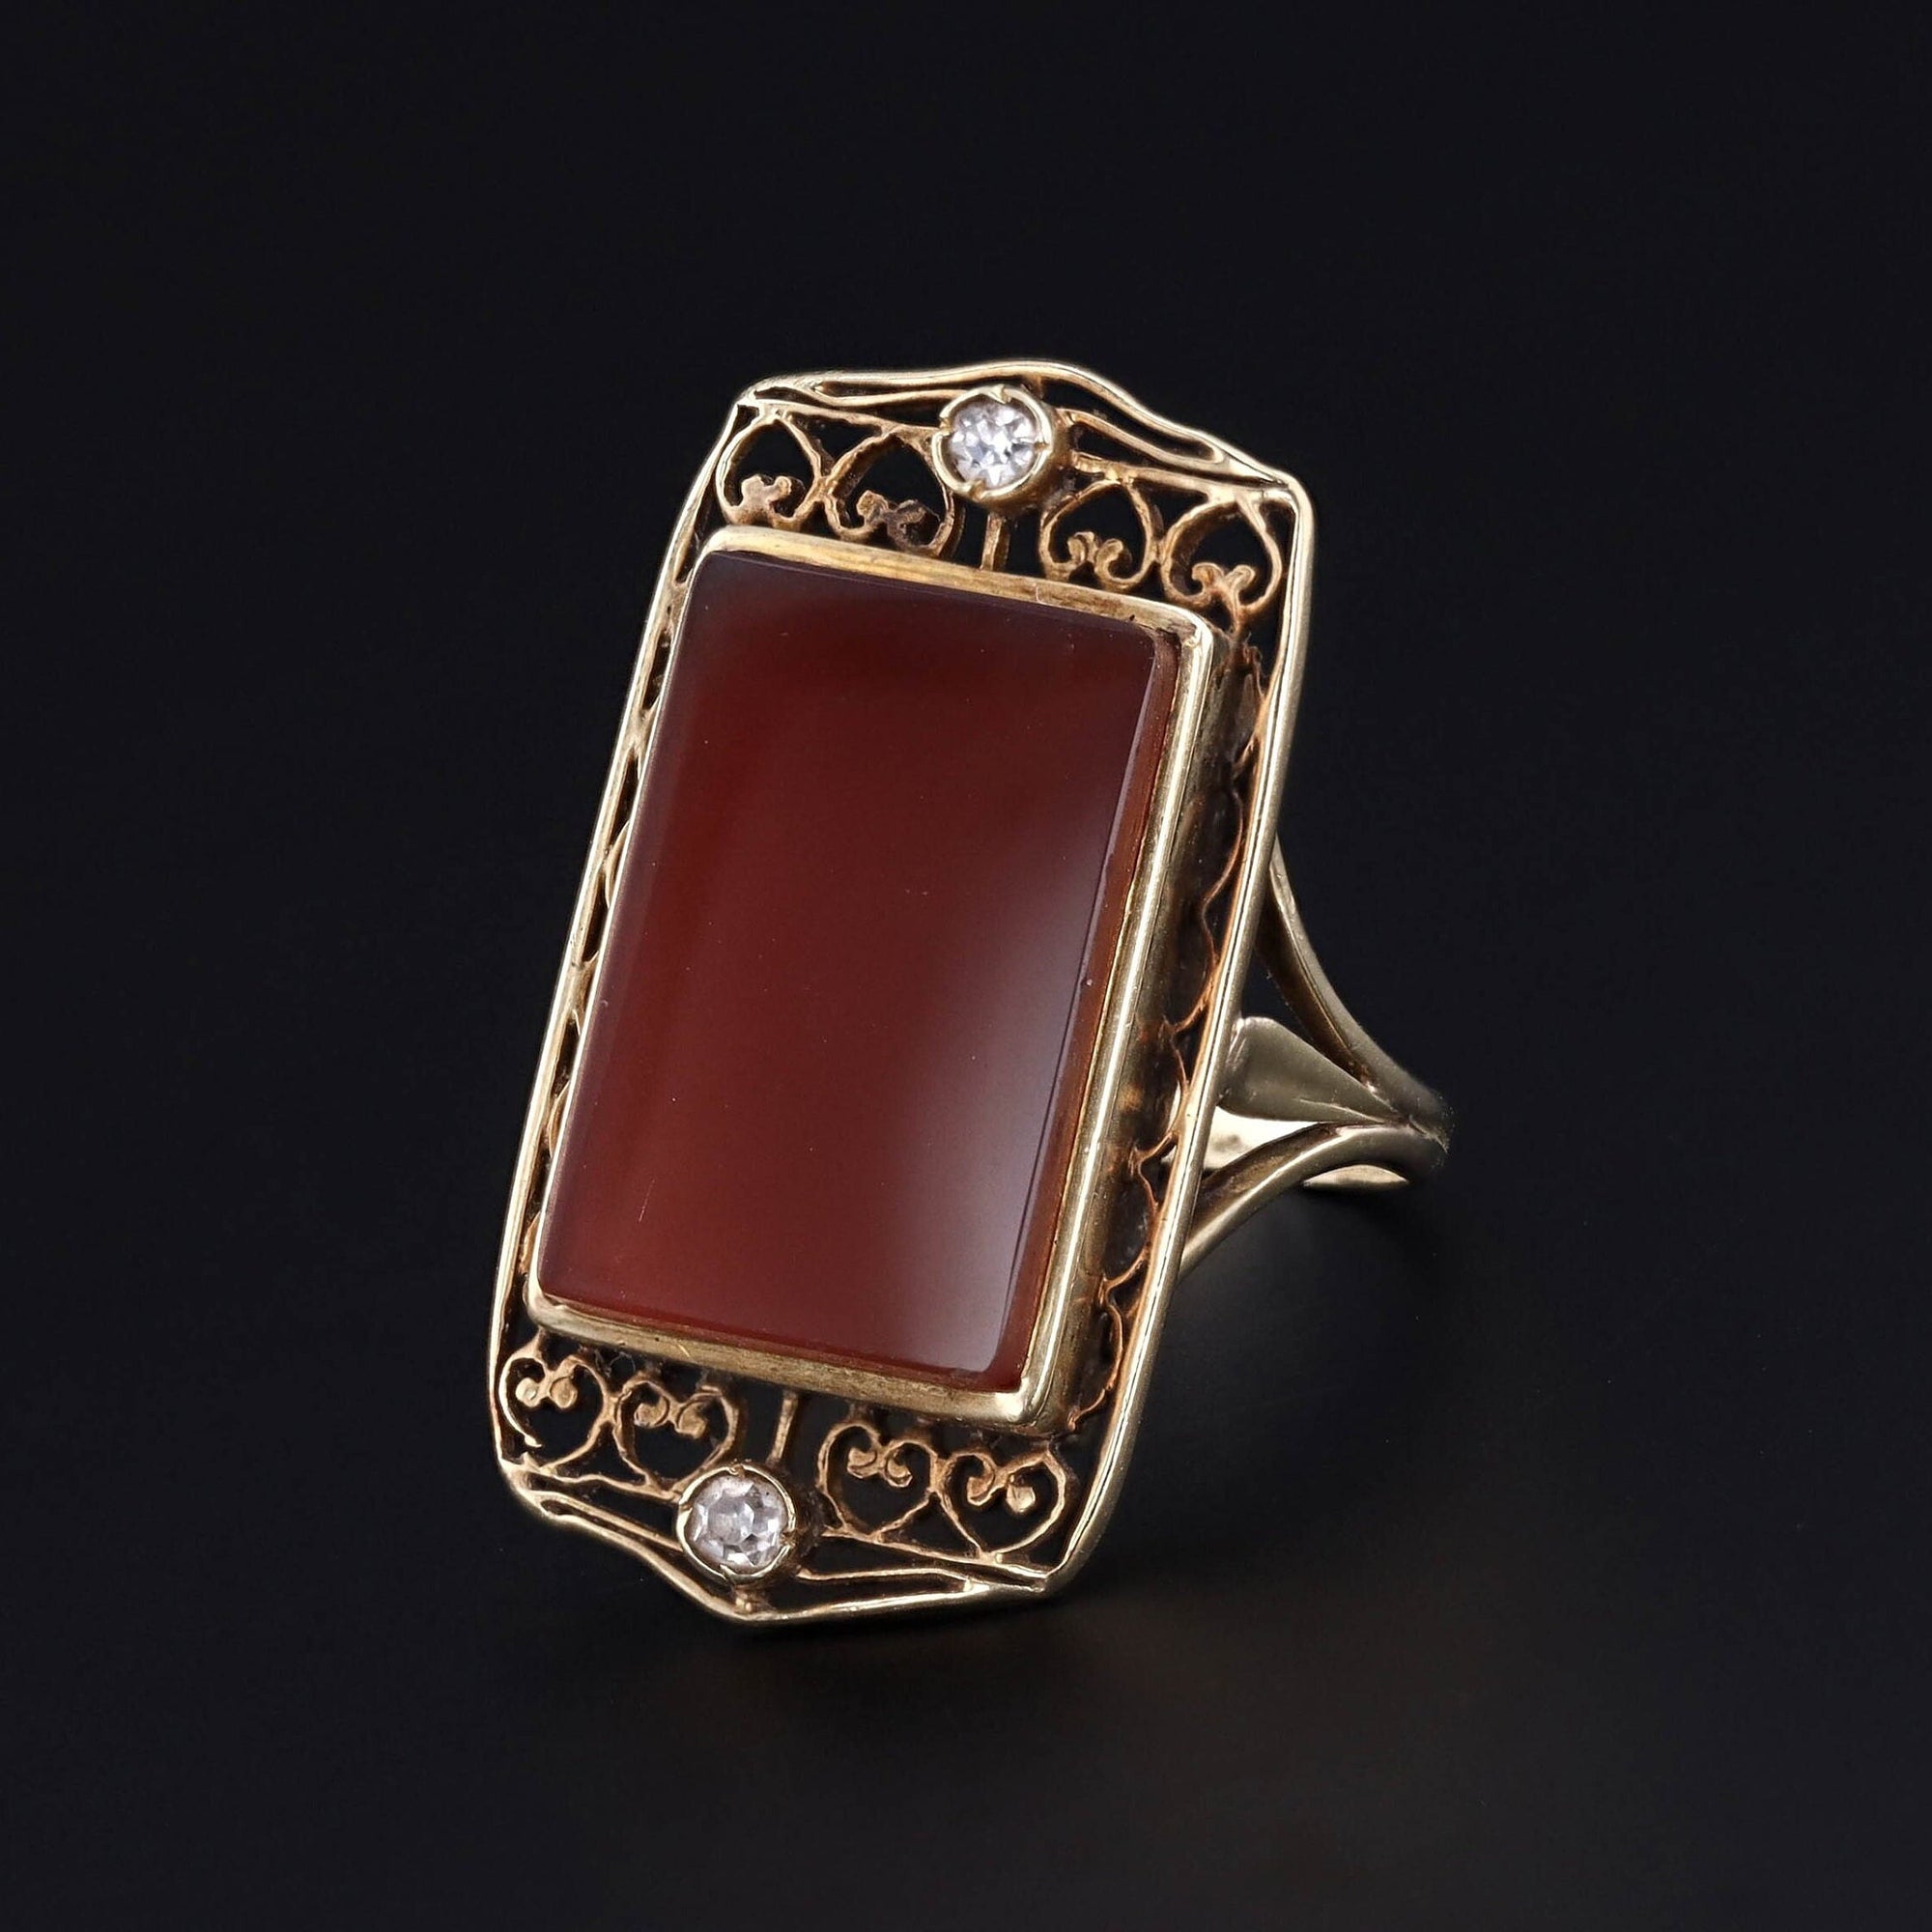 Vintage Red Agate and Diamond Filigree Ring of 14k Gold